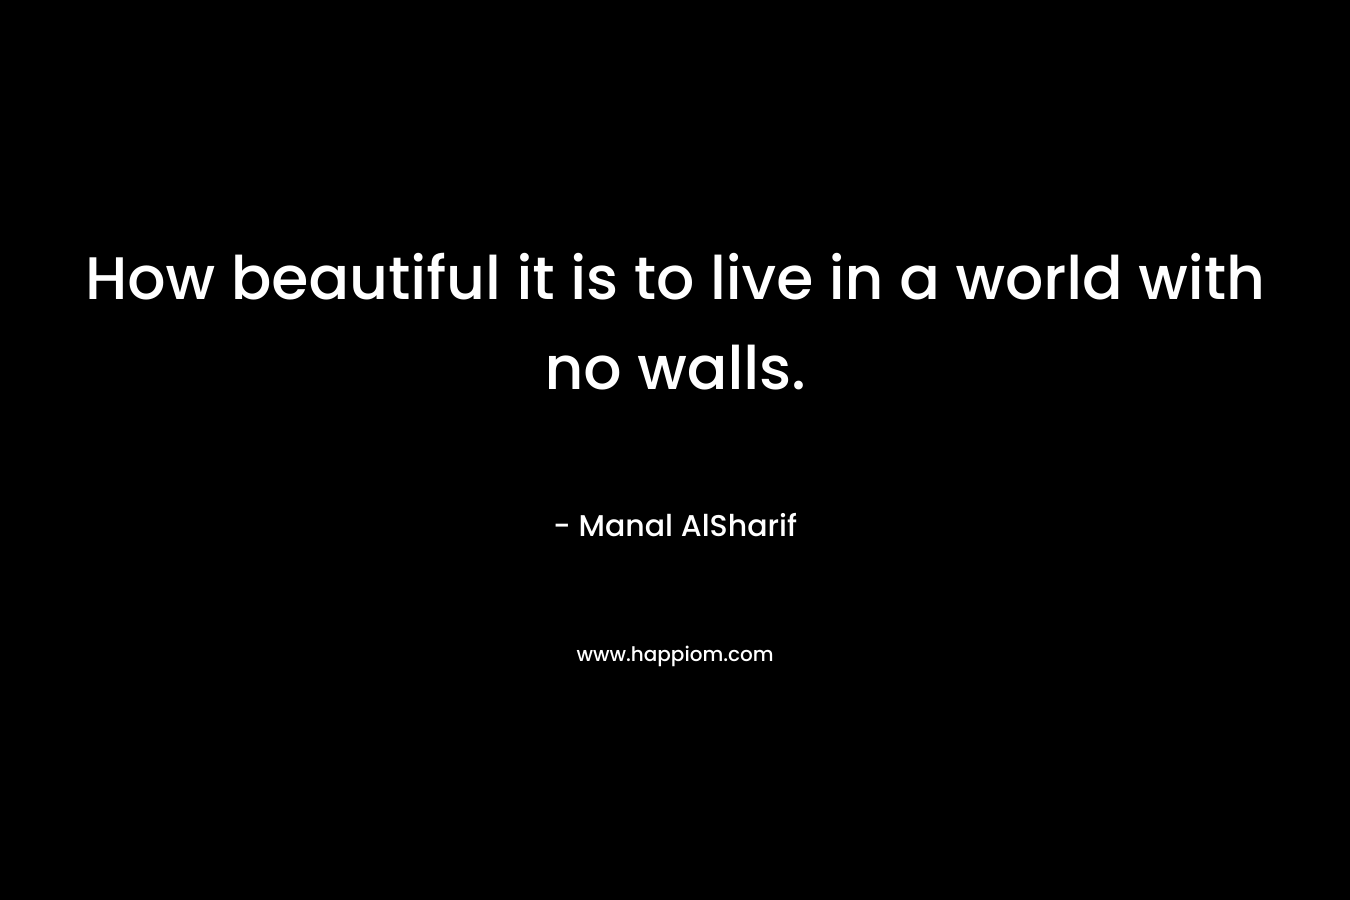 How beautiful it is to live in a world with no walls. – Manal AlSharif